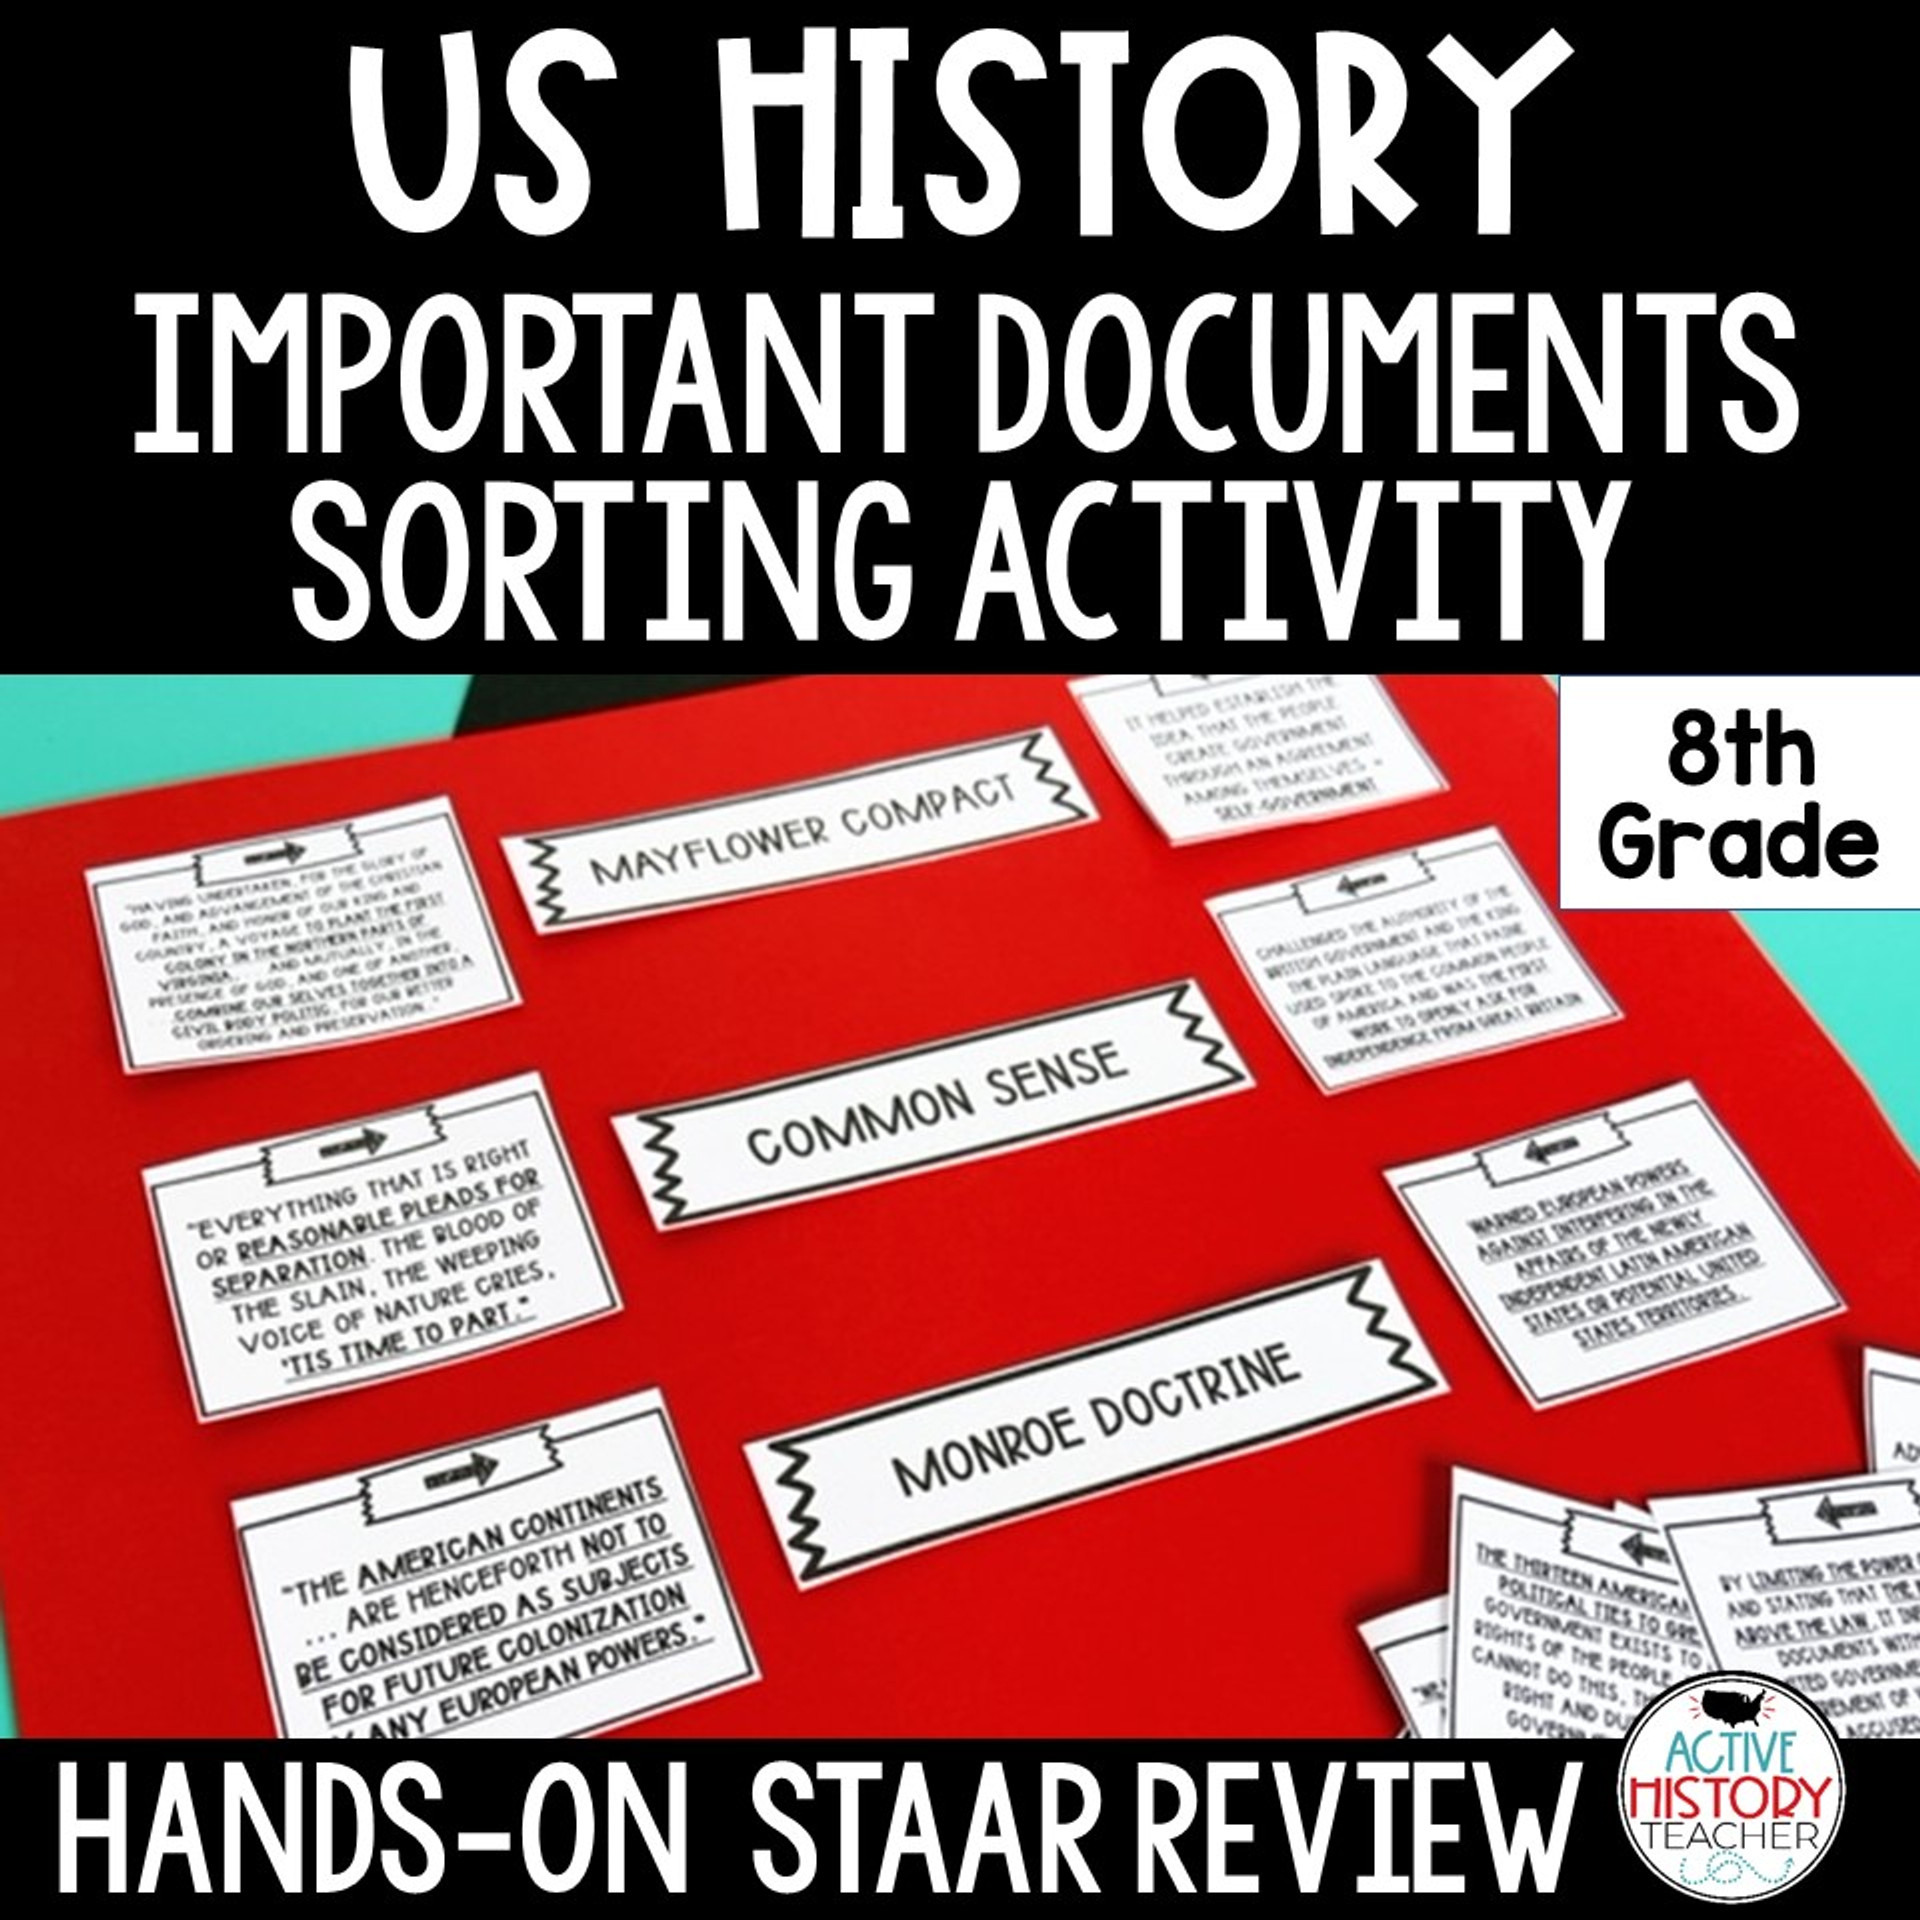 US History Documents Review 3 Way Match STAAR Review! Amped Up Learning